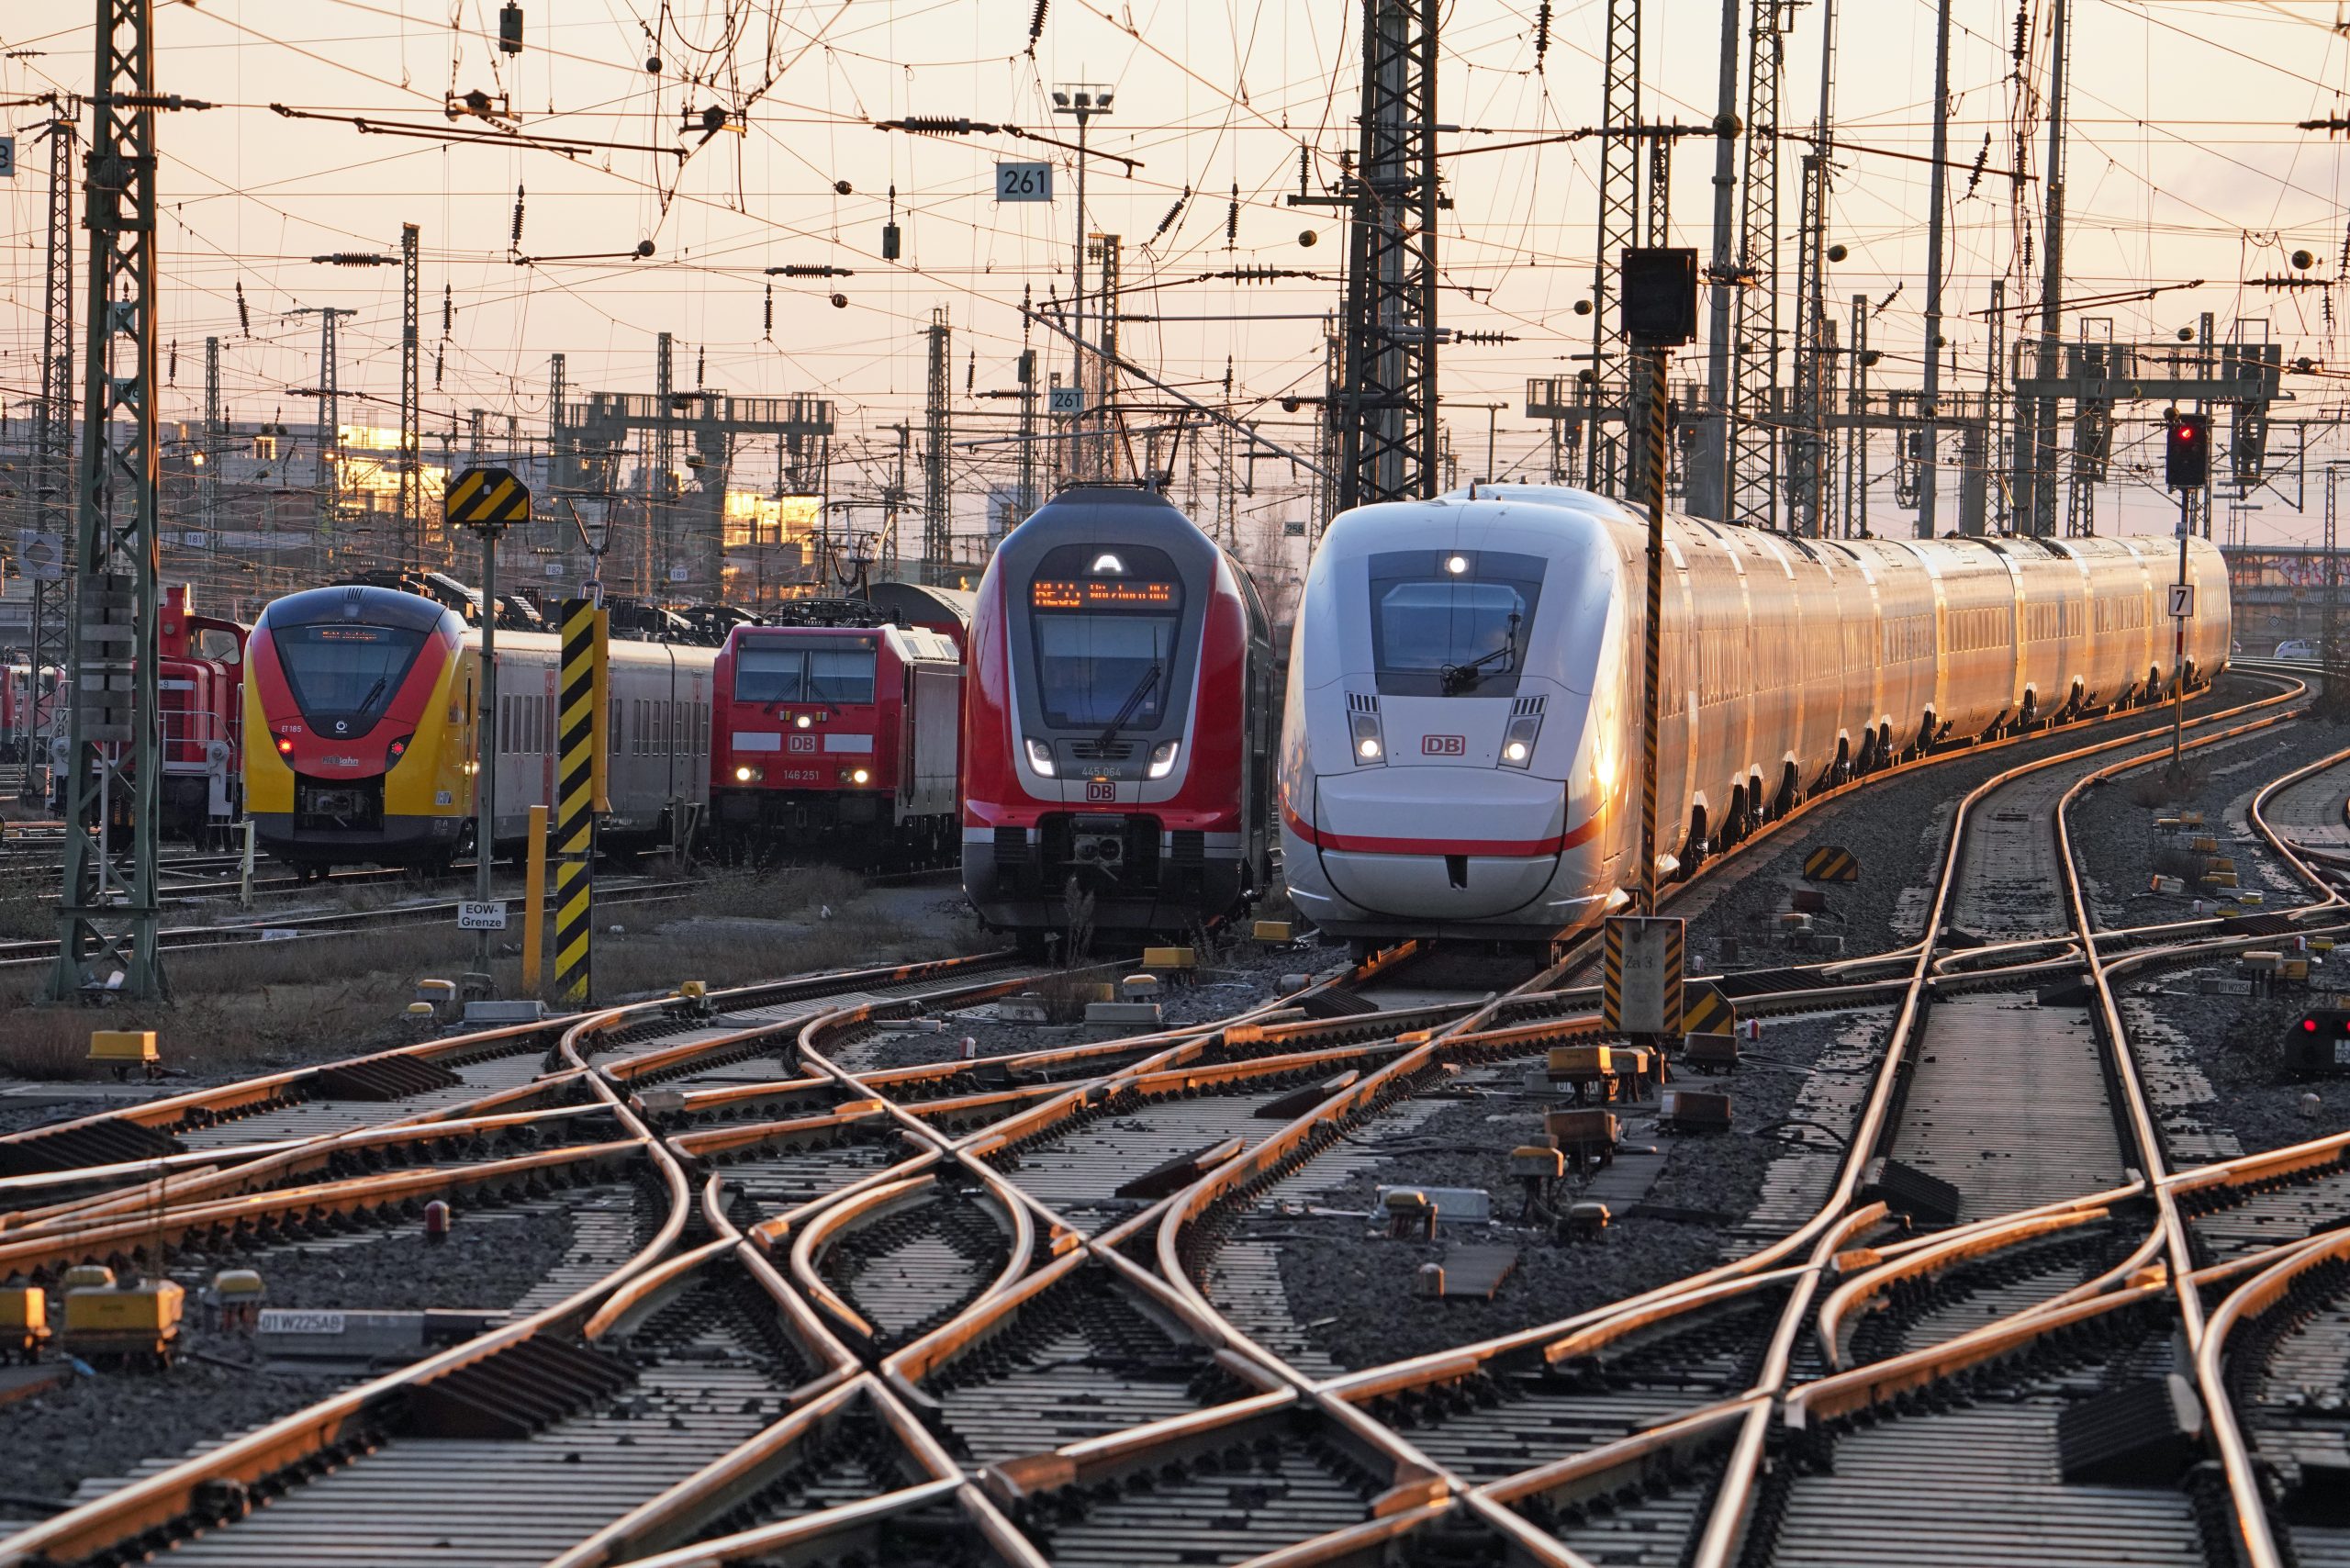 Rail infrastructure: Different trains standing on a track system in Frankfurt main station